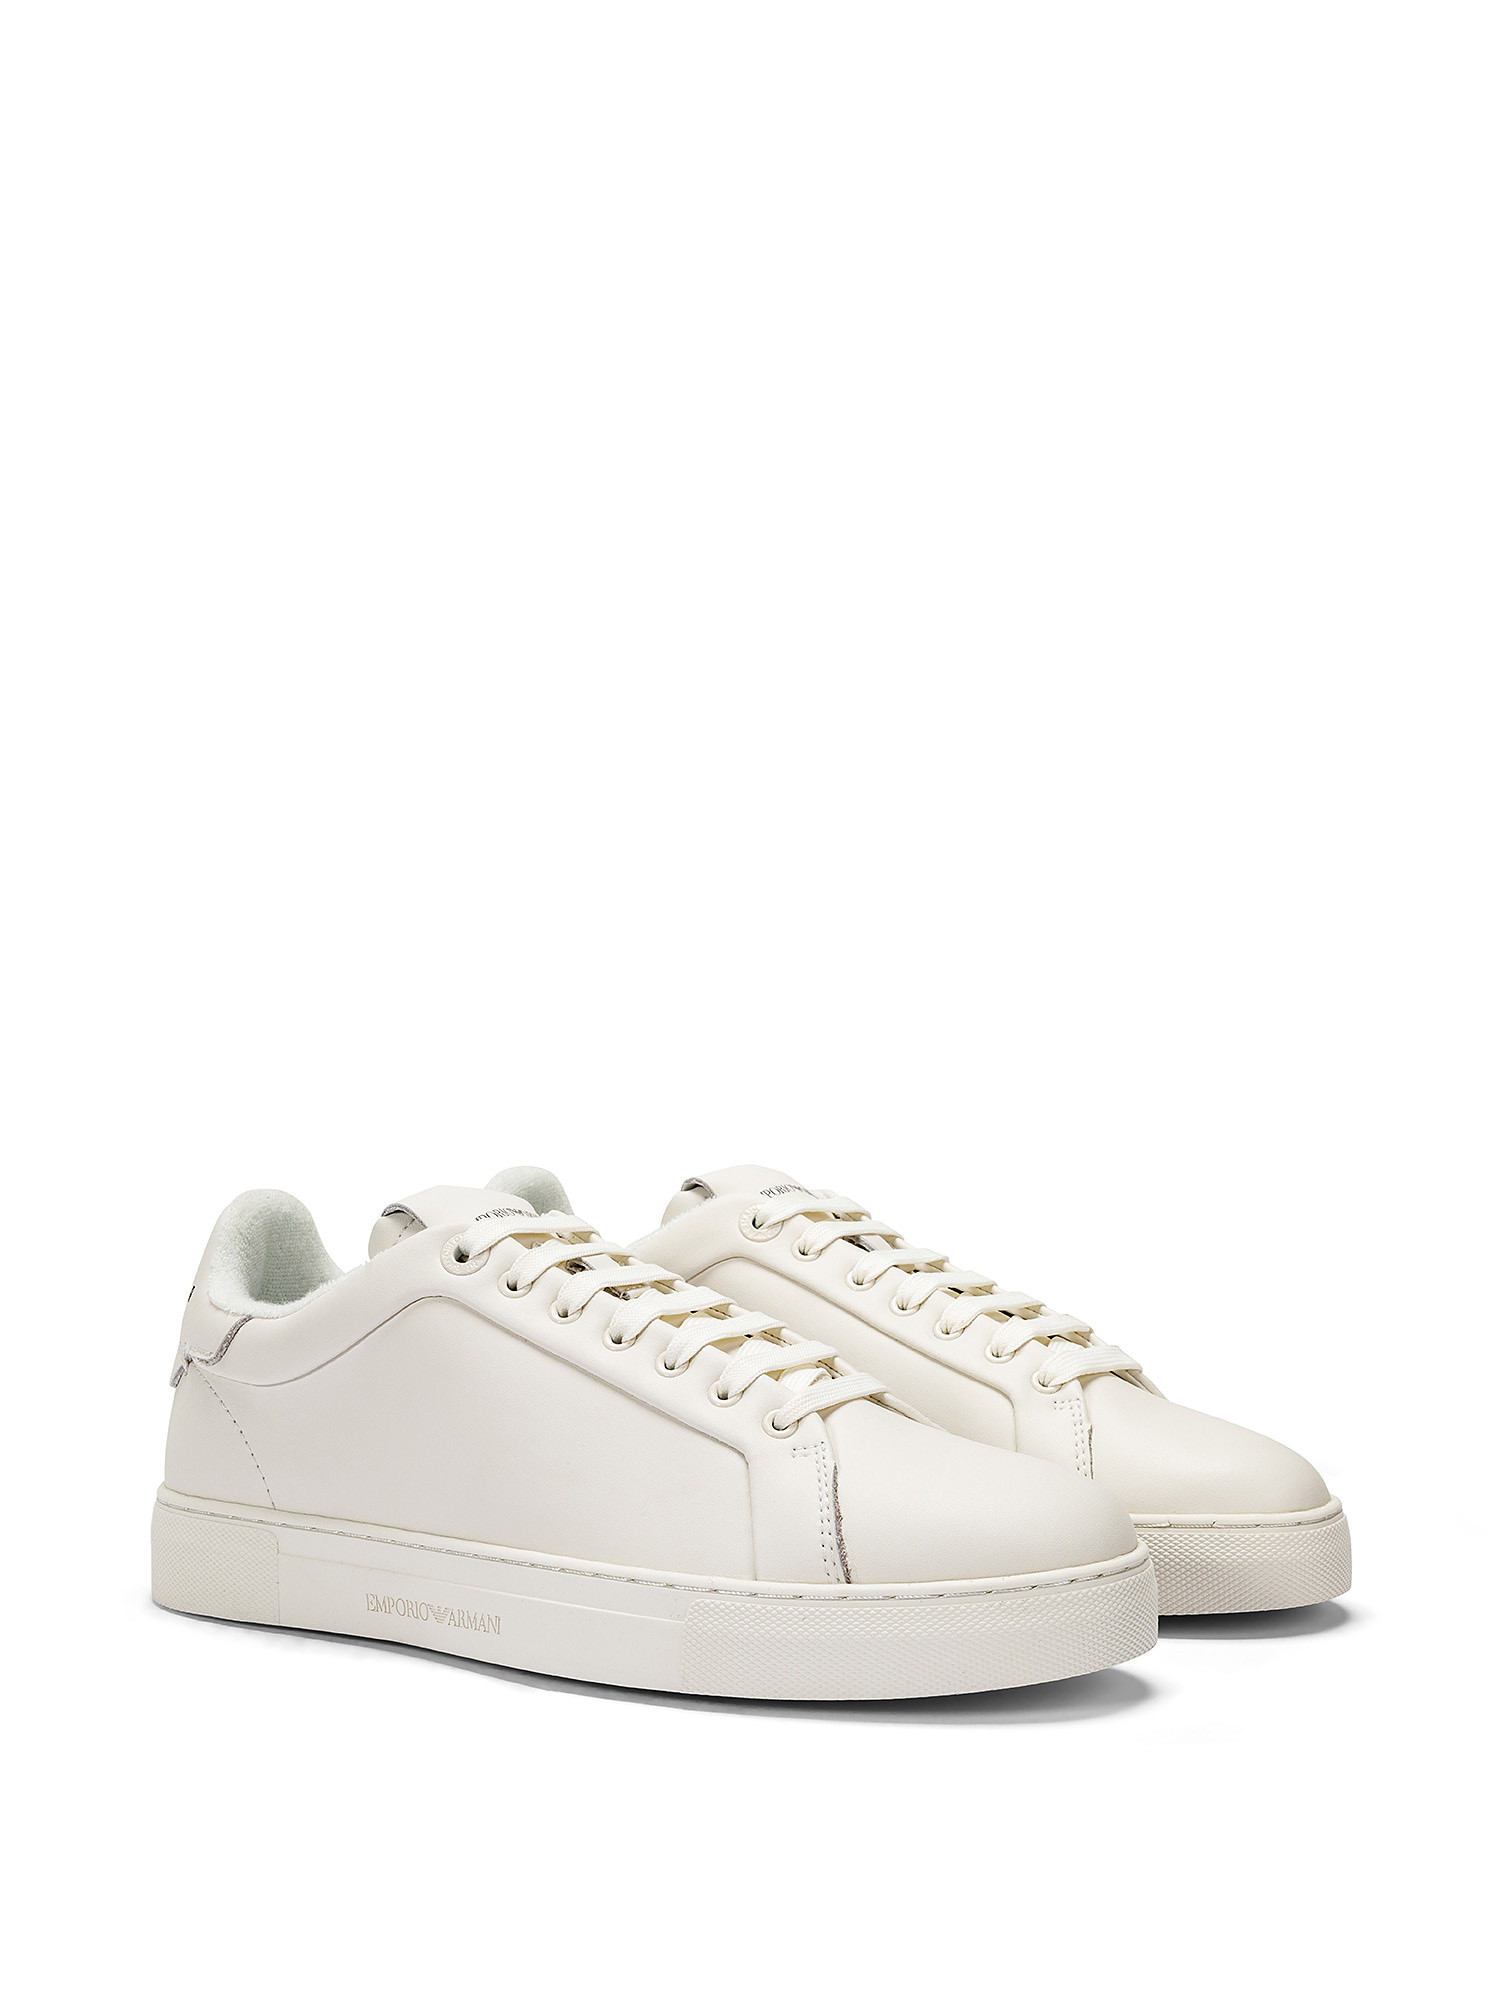 Emporio Armani - Sneakers, White, large image number 1